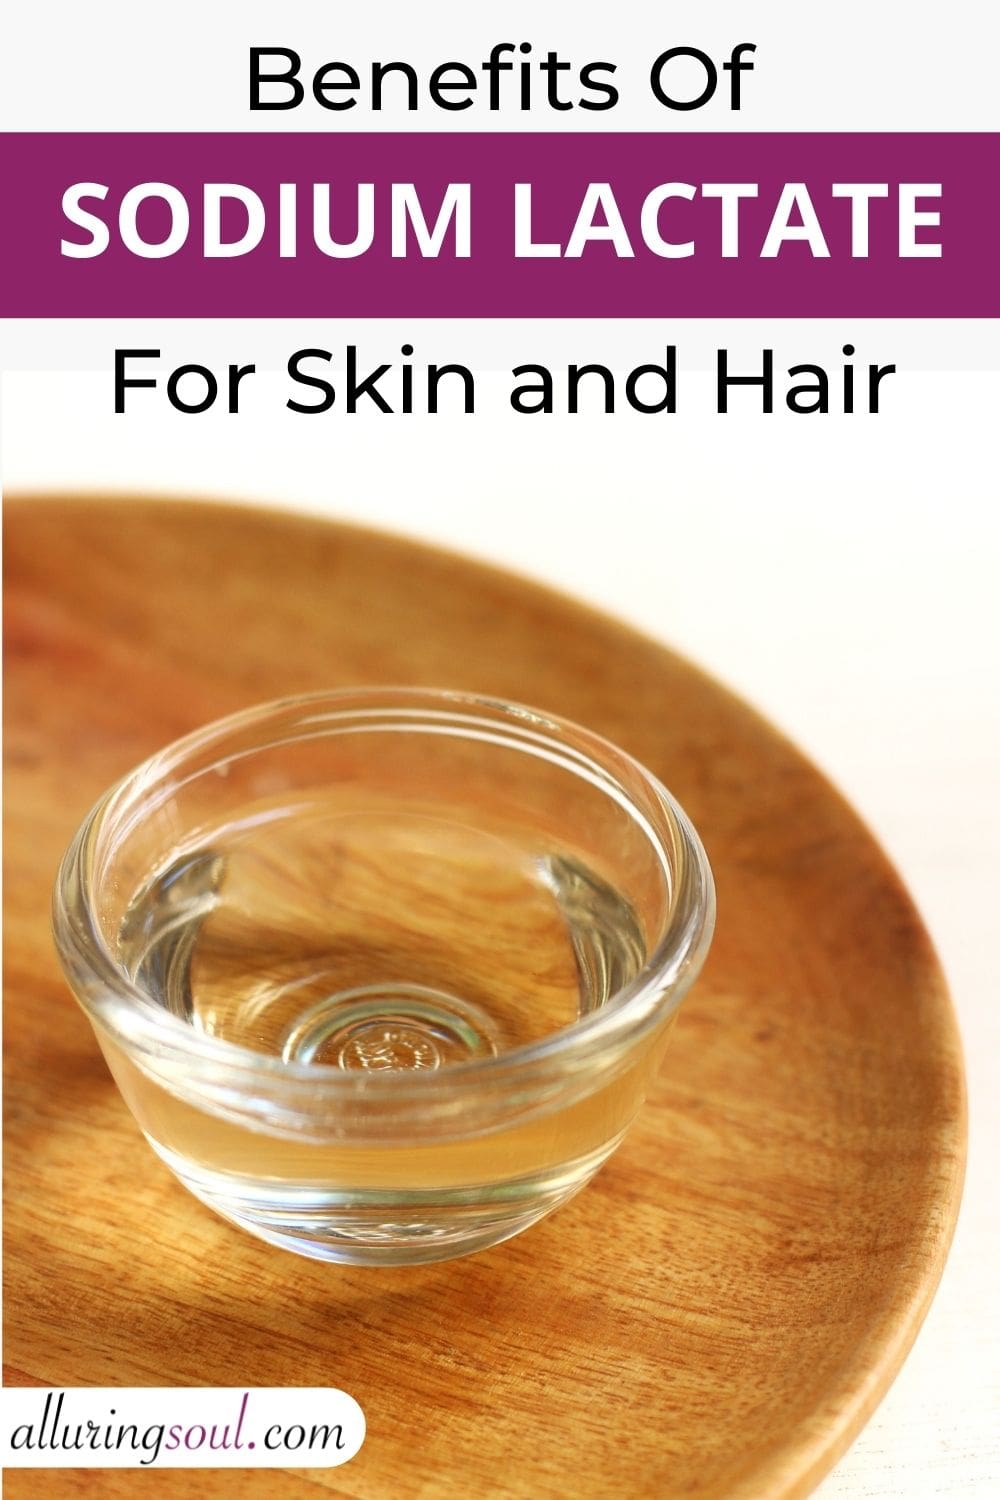 Benefits Of Sodium Lactate For Skin And Hair